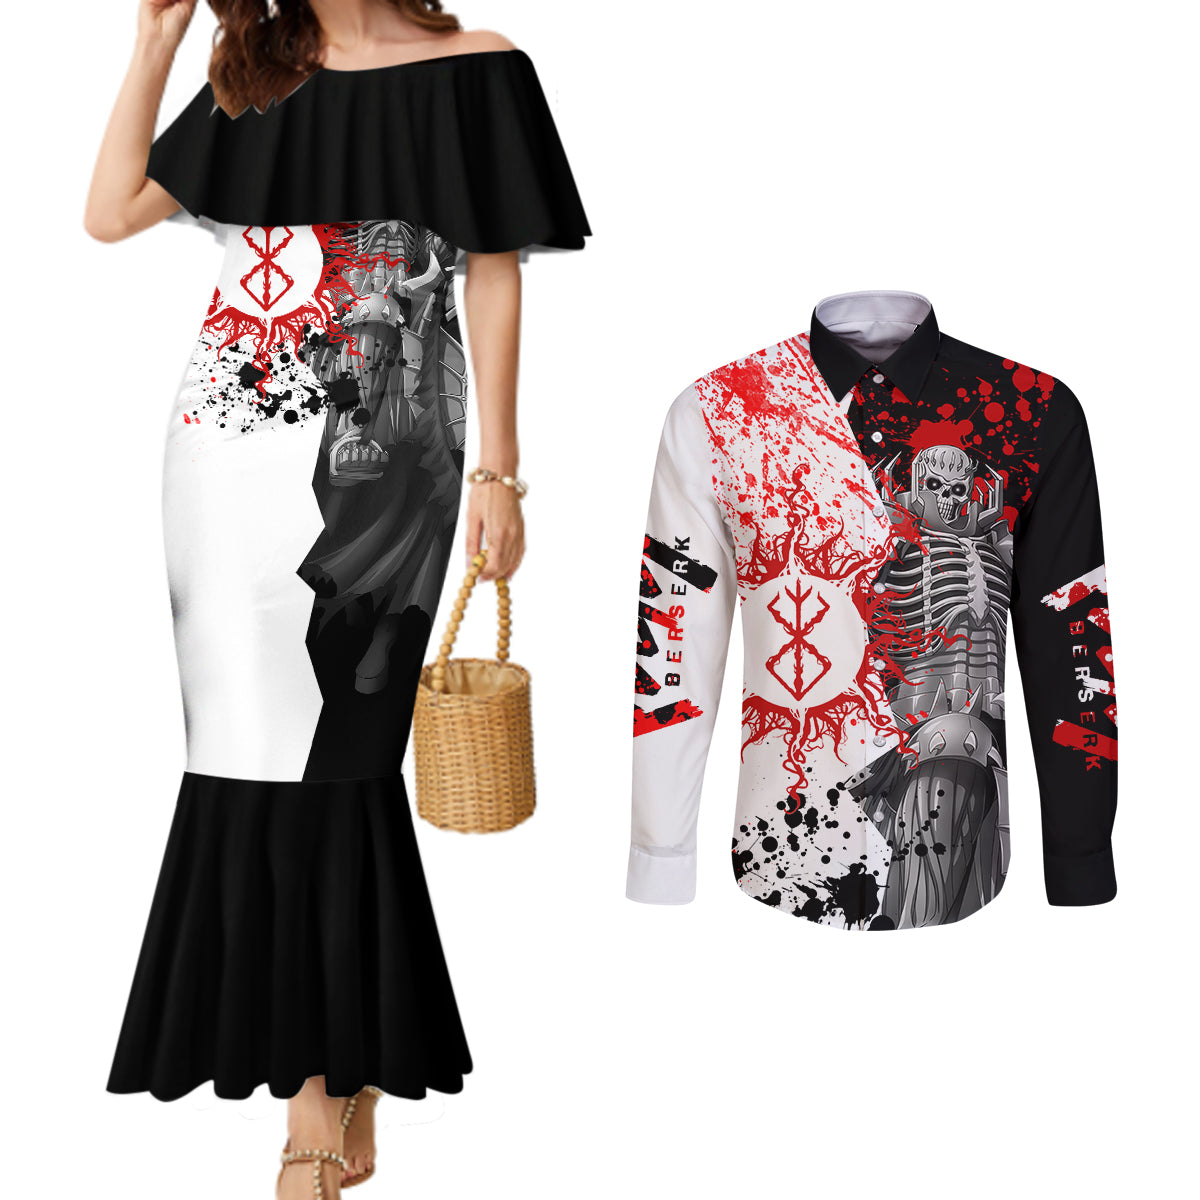 The Skull Knight Berserk Couples Matching Mermaid Dress and Long Sleeve Button Shirt Anime Japan Style